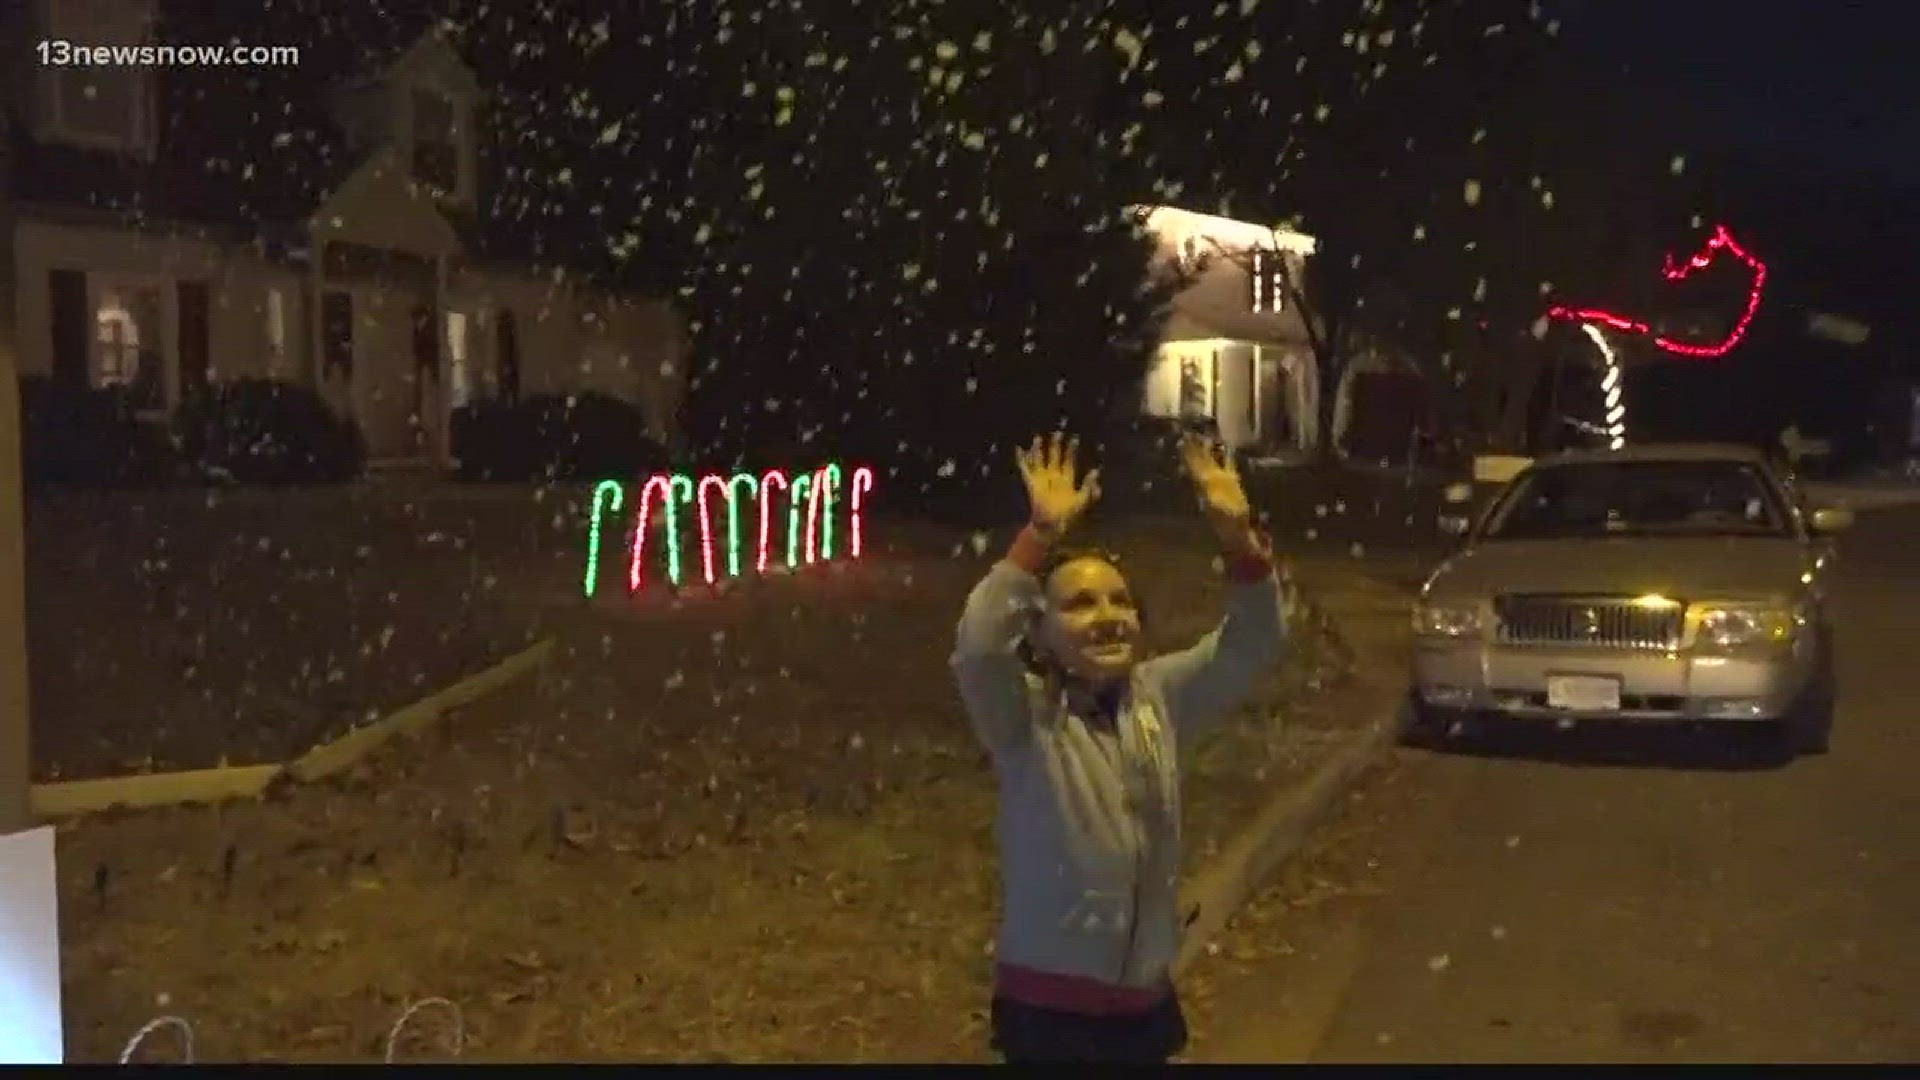 It's definitely the season for bright lights, but one teen in Va. Beach is taking it to a whole new level. He is slowly turning his whole street into a synchronized light display, set to music. And it's not just for fun: it's also a fundraiser.